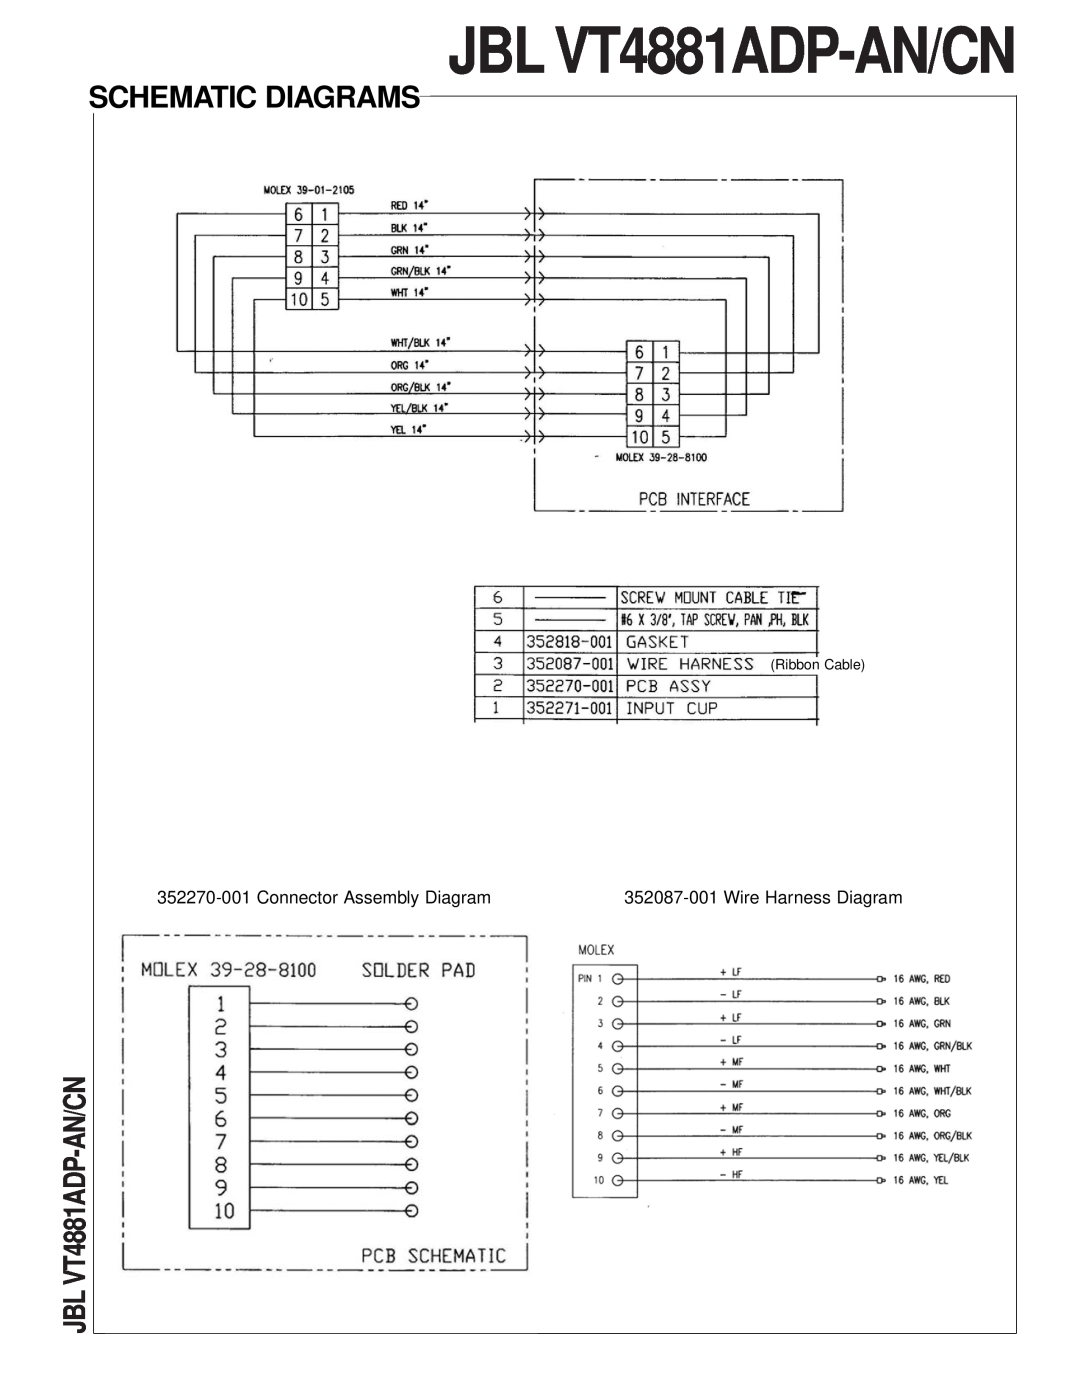 JBL technical manual JBL VT4881ADP-AN/CN, Schematic Diagrams, Connector Assembly Diagram, Wire Harness Diagram 